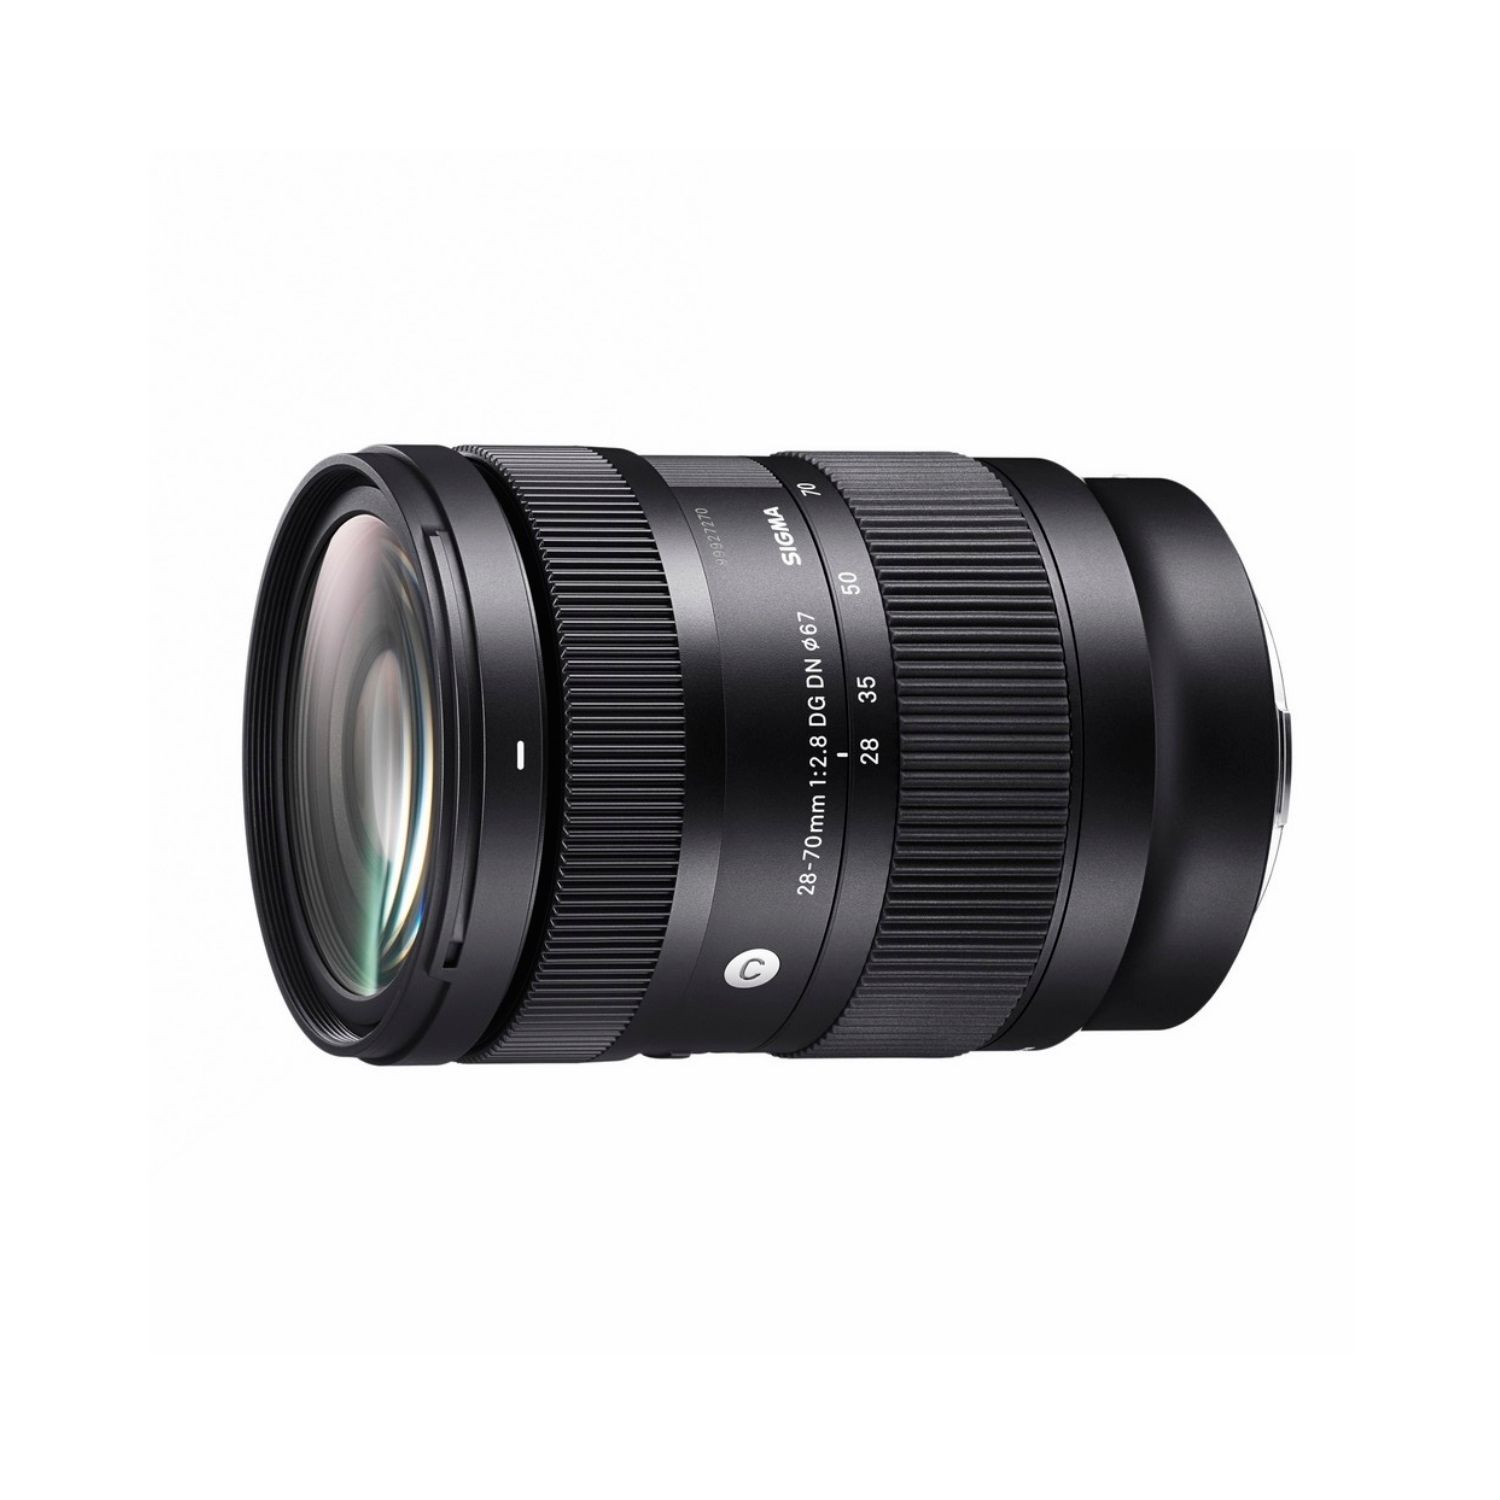 Sigma 28-70mm f/2.8 DG DN Contemporary Lens for L-Mount